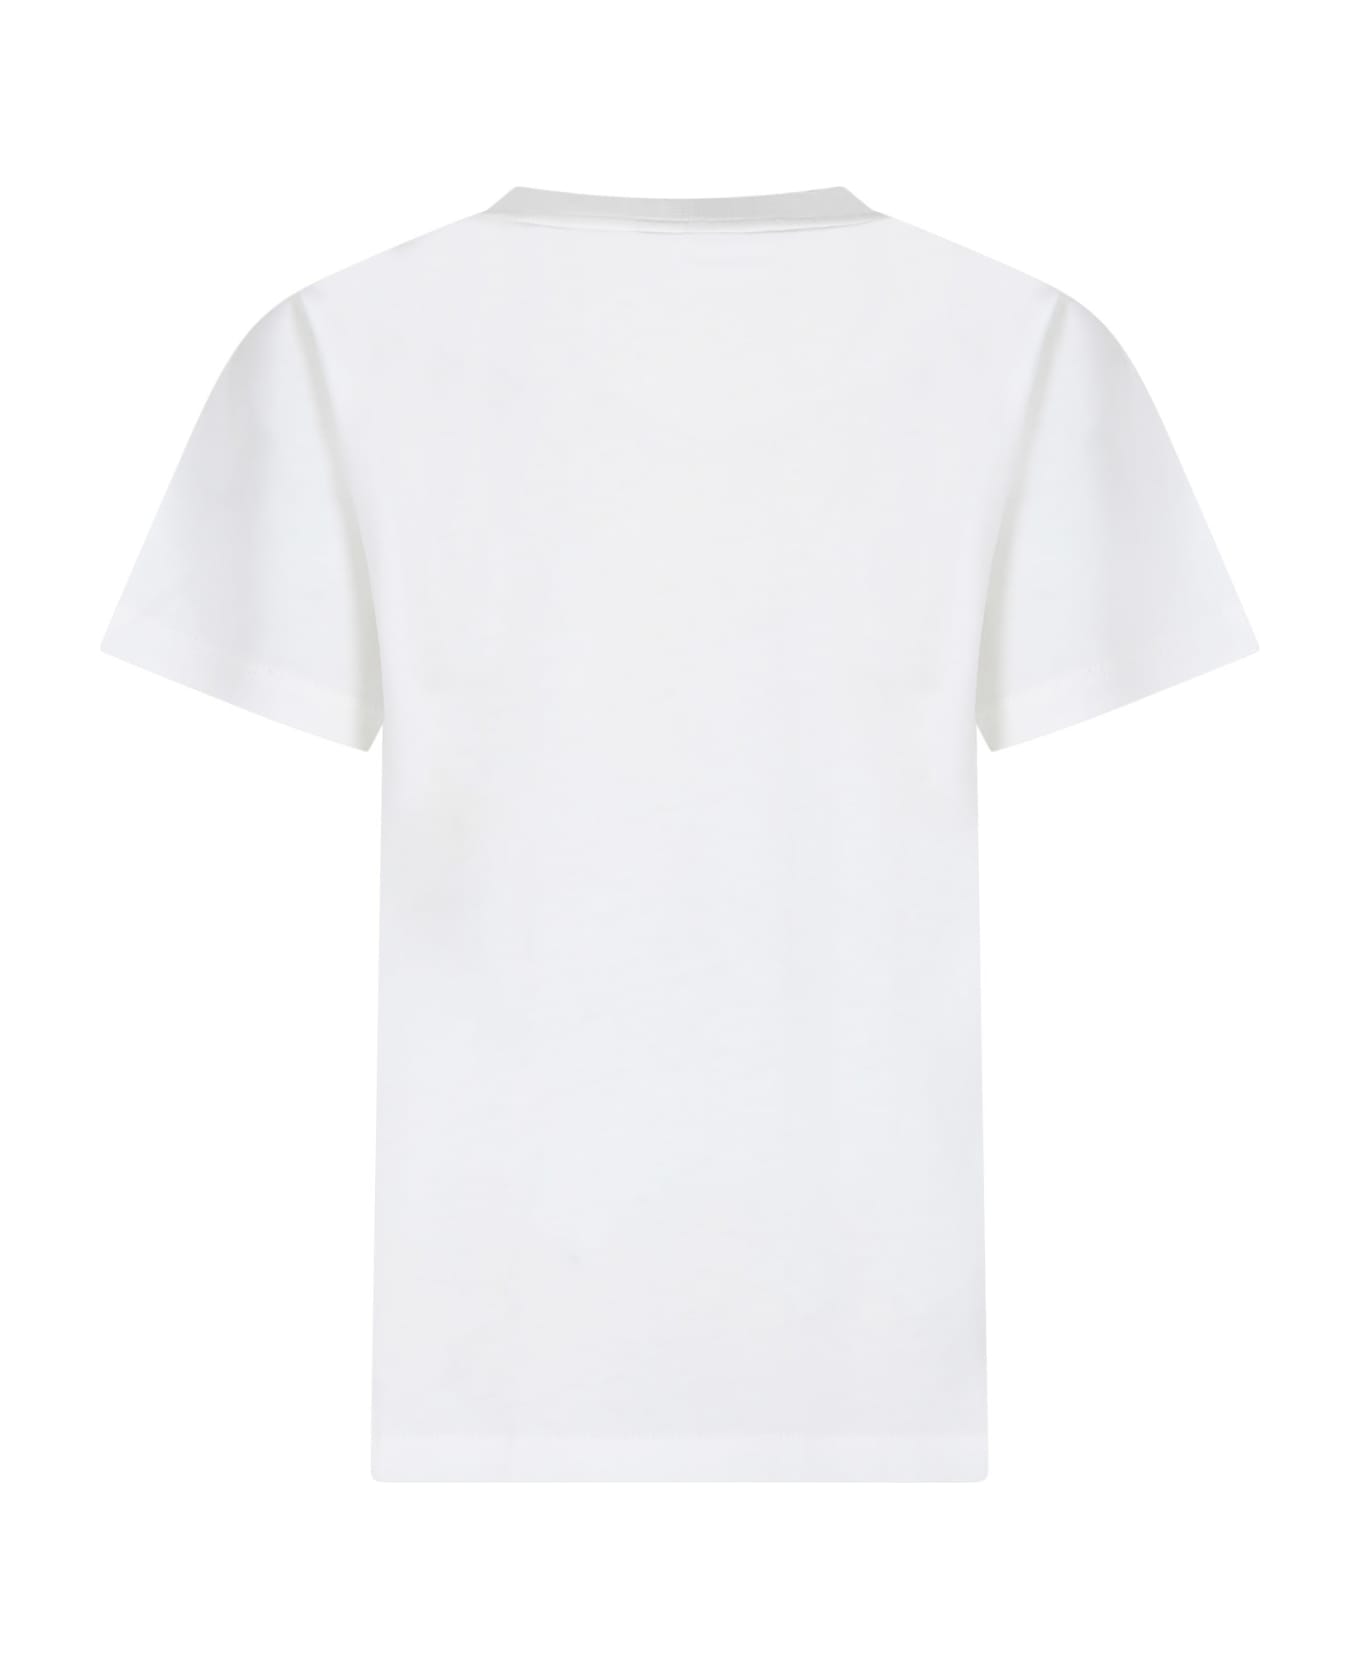 Stella McCartney Kids White T-shirt For Kids With Logo And Monsters Print - White